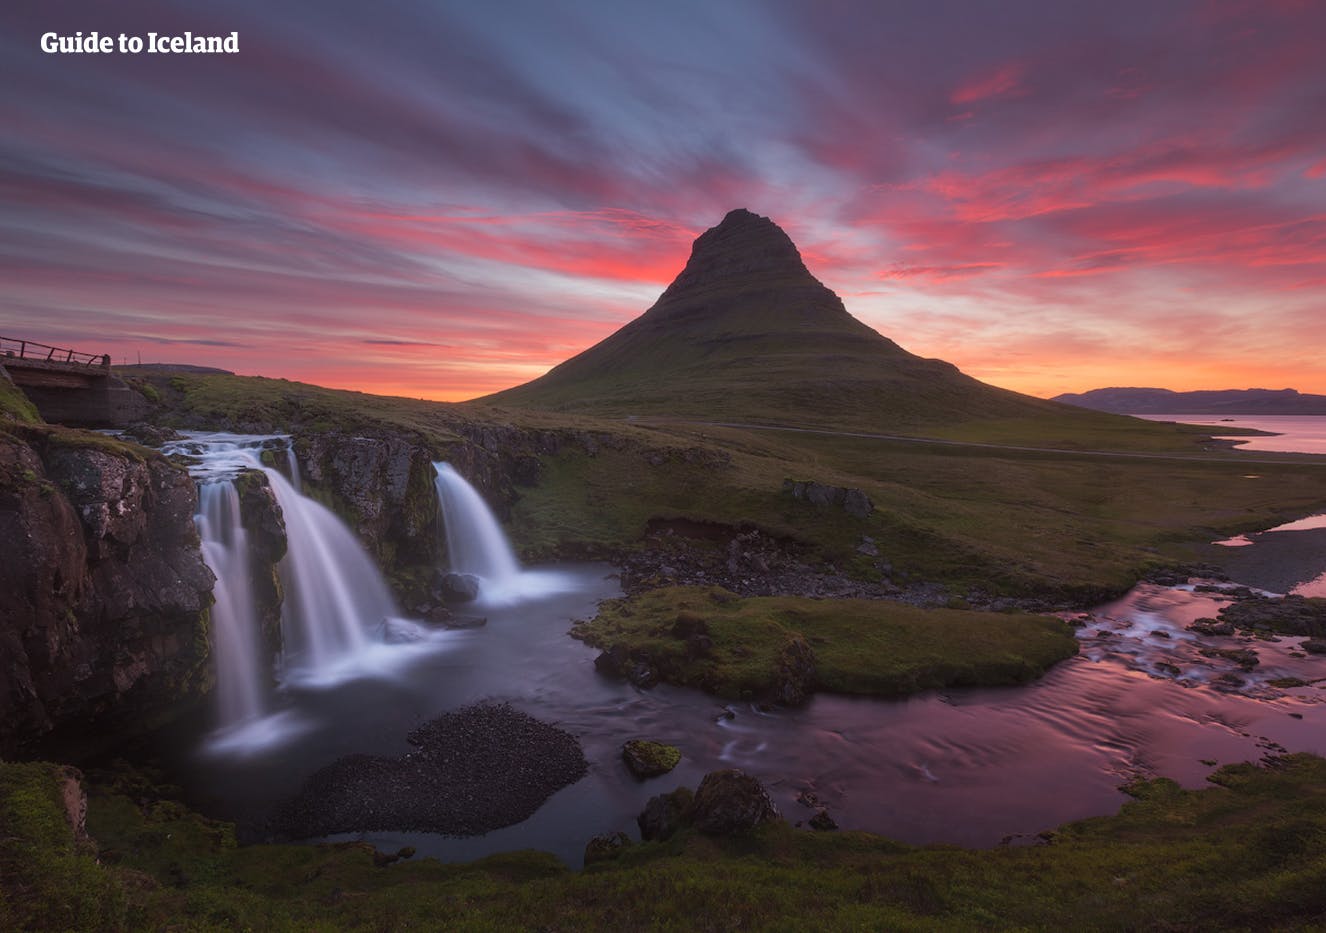 The triple cascade of Kirkjufellsfoss constitutes a beautiful foreground for Mt. Kirkjufell, as its peak is painted gold by the midnight sun of Iceland.